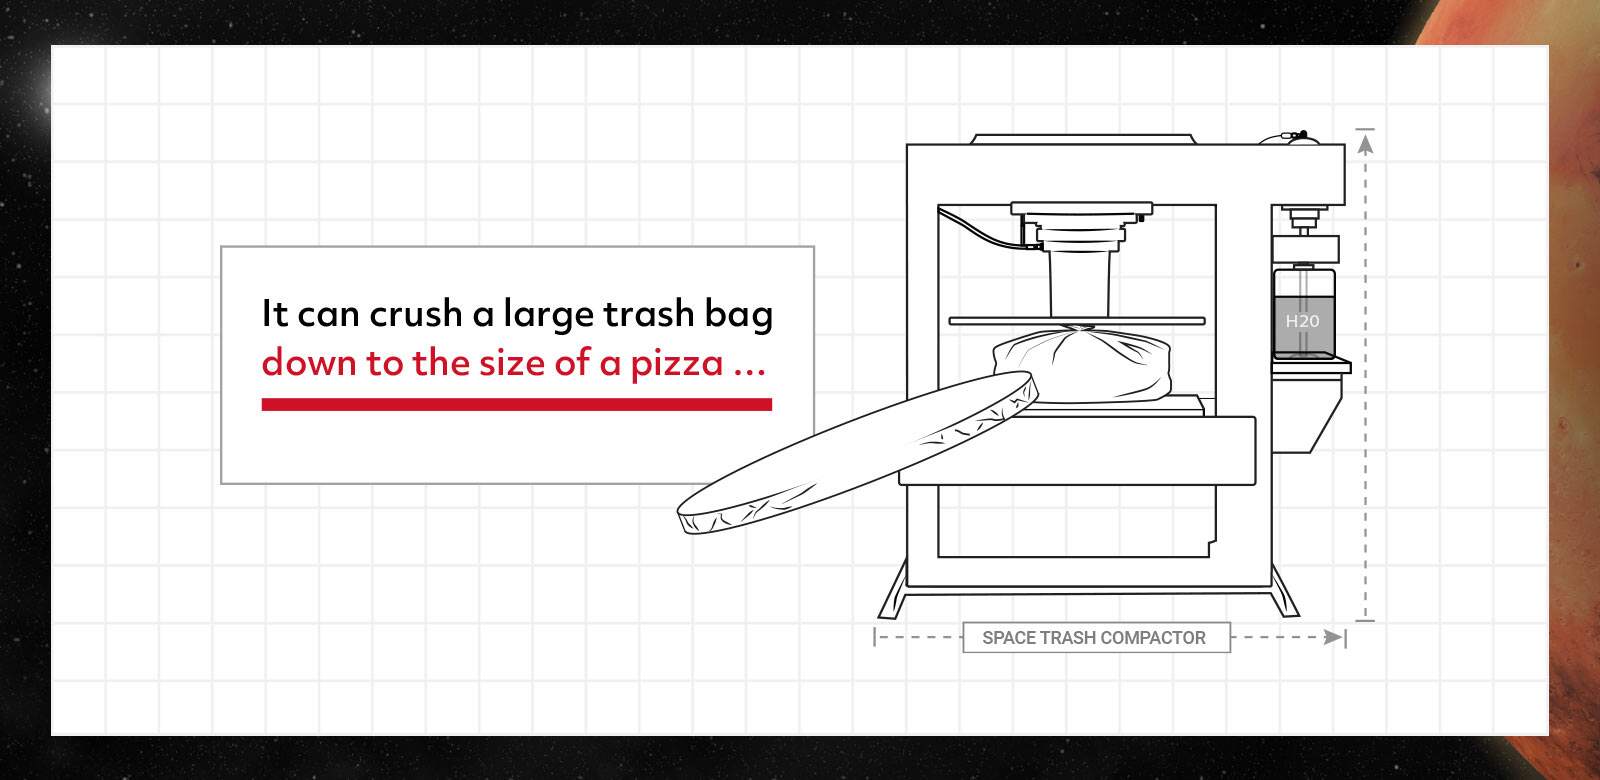 It can crush a large trash bag down to the size of a pizza